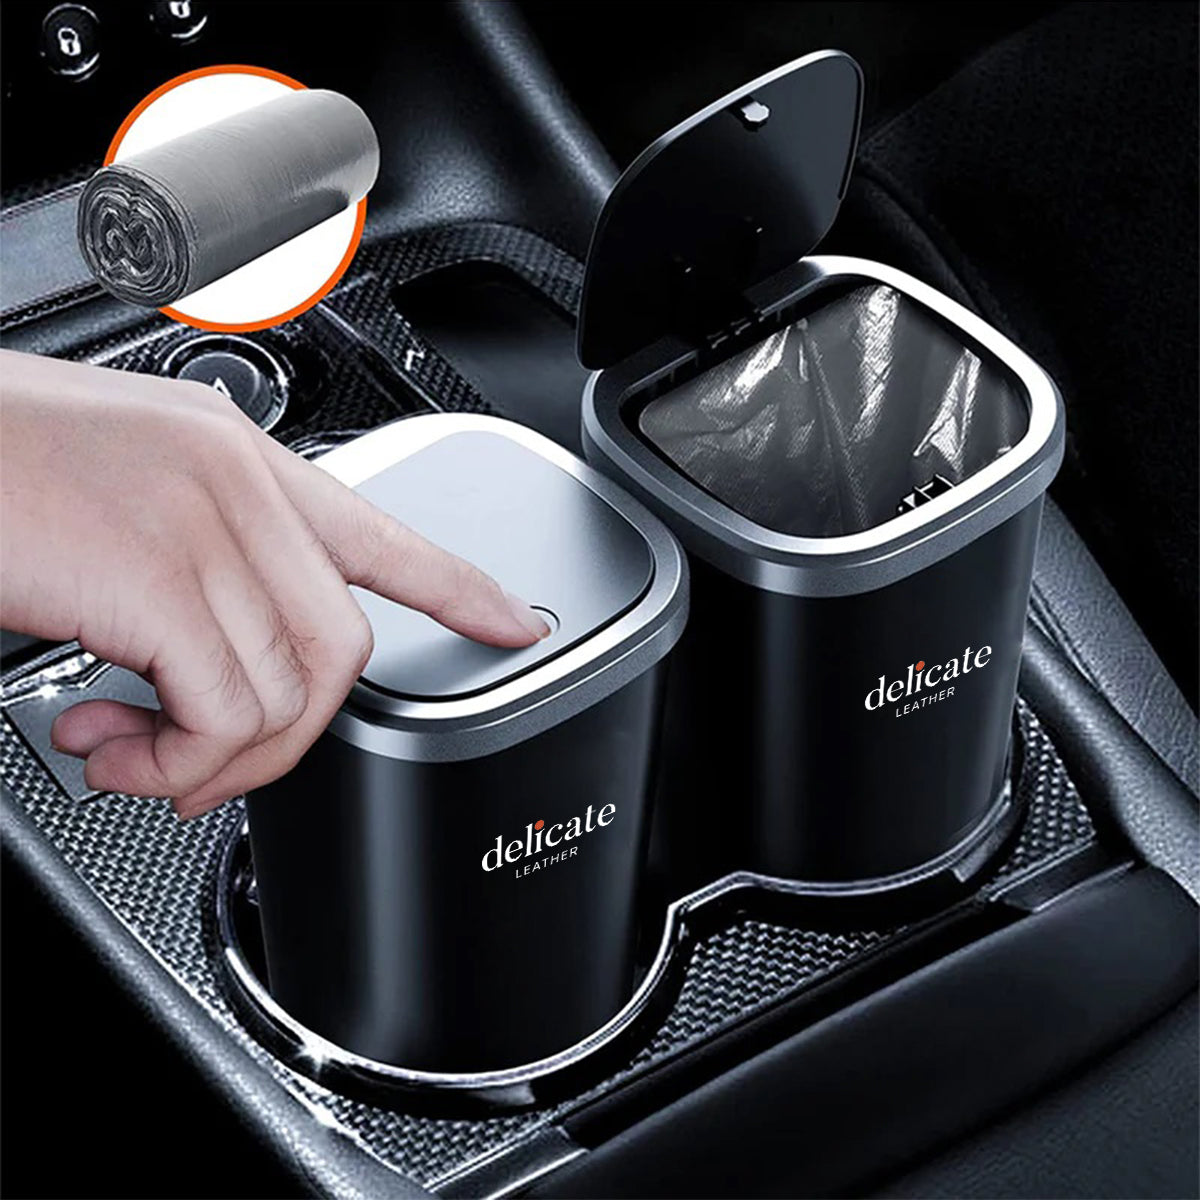 Car Trash Cans, Custom For Your Cars, Compact & Durable Car Accessories for Interior Use 2 Pack, Practical Car Organizers and Storage Cups with Pop-Up Open, Car Accessories FD11993 - Delicate Leather